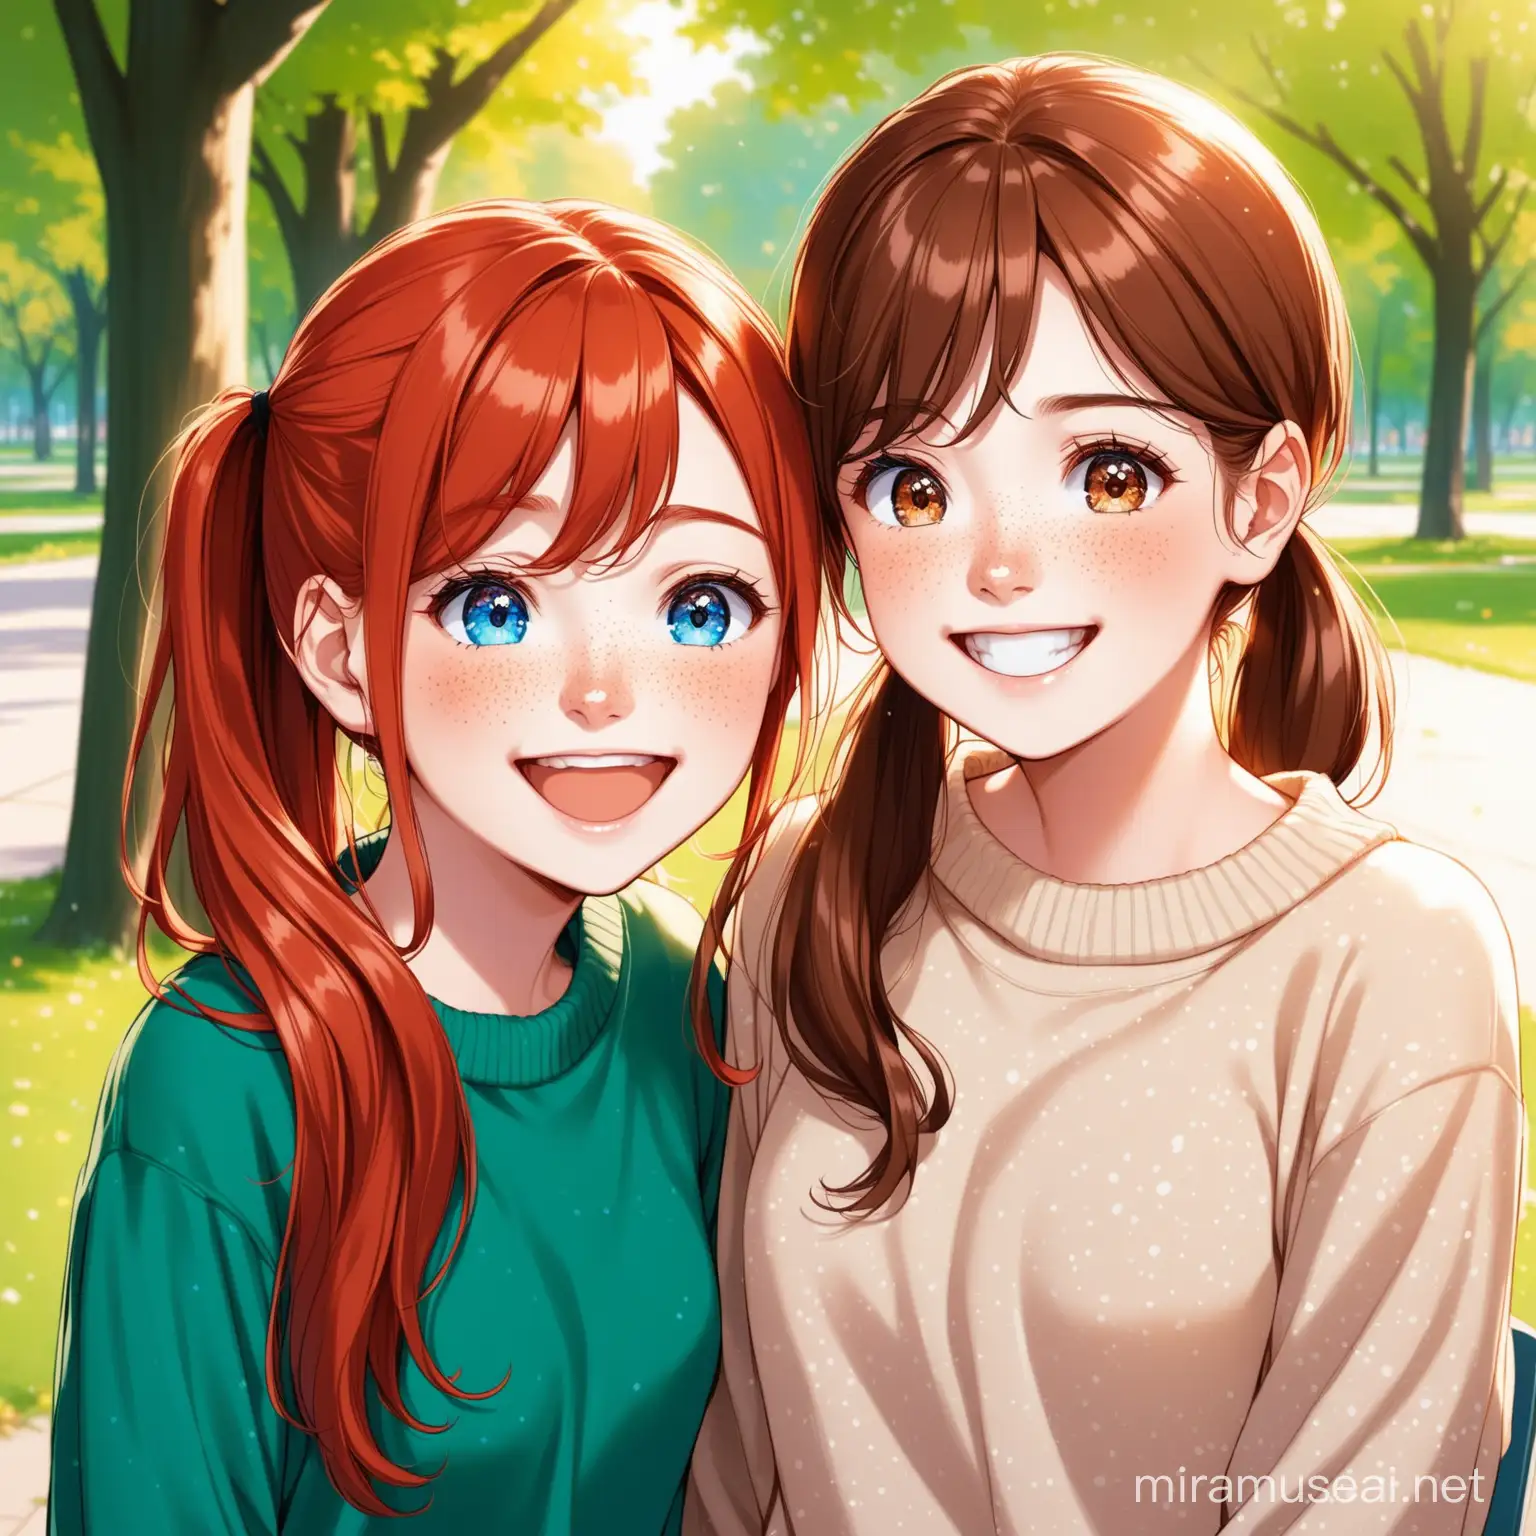 Laughing Teenage Girl with Red Hair and Freckles and BrownHaired Girl with Ponytails in Park